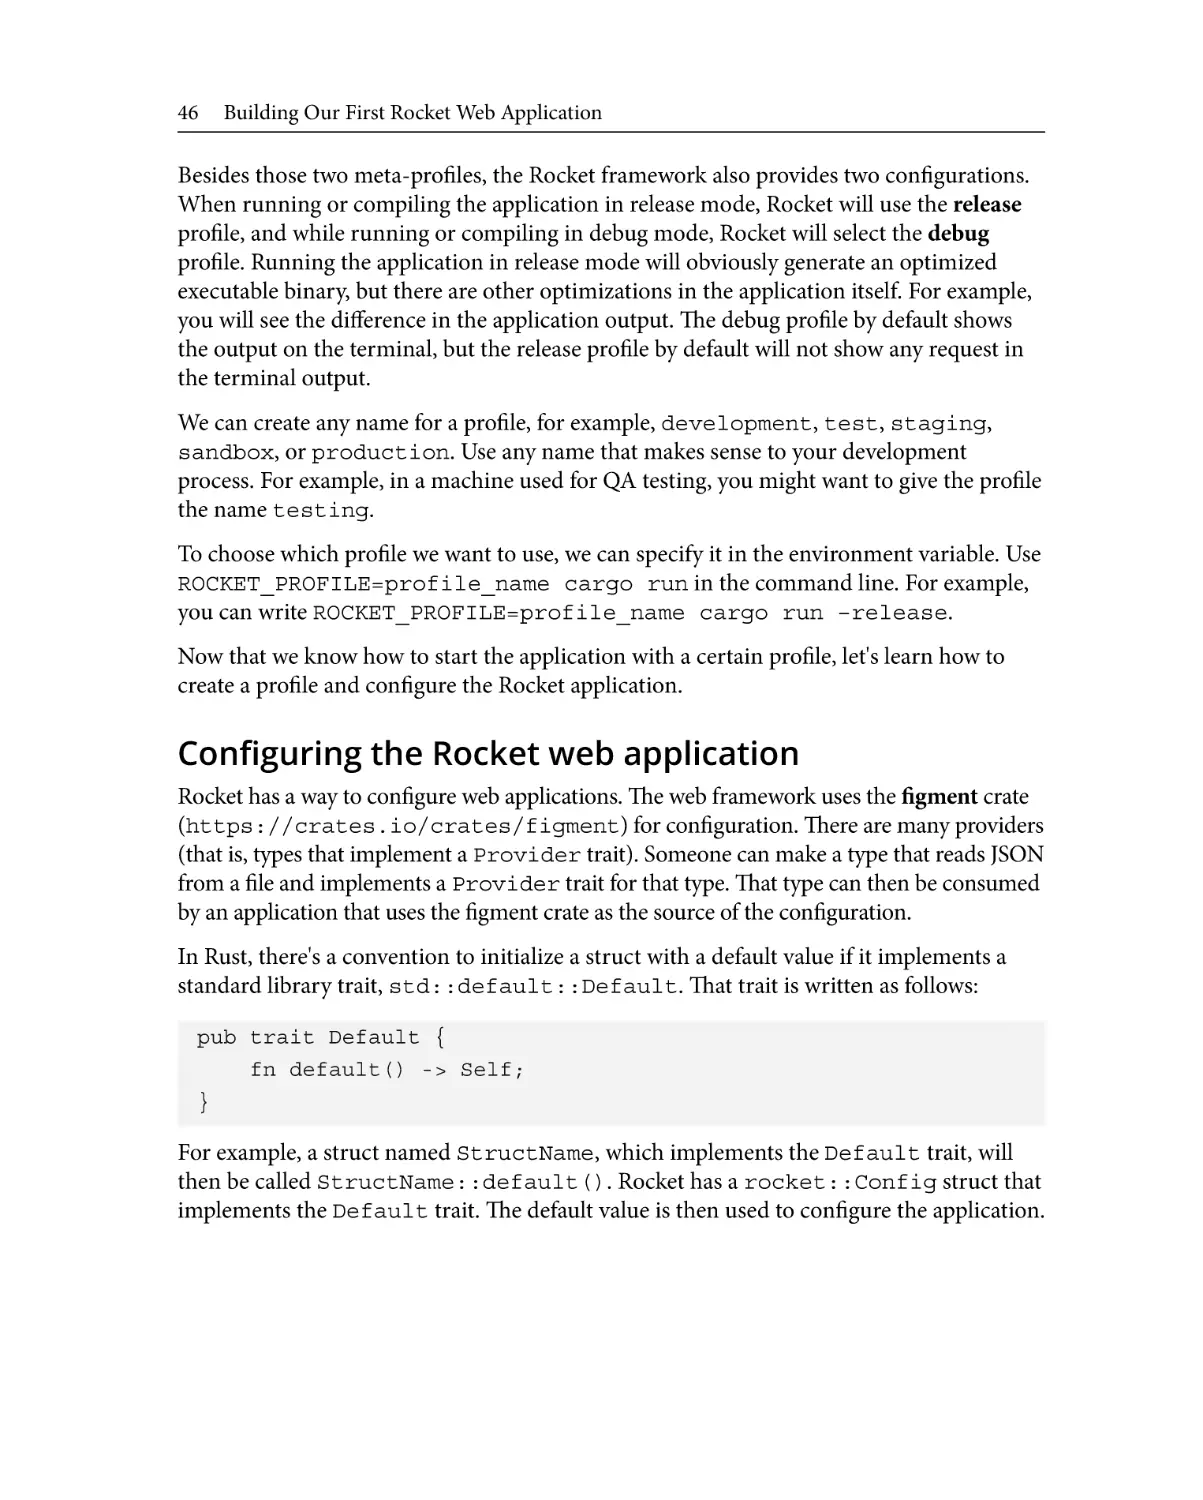 Configuring the Rocket web application